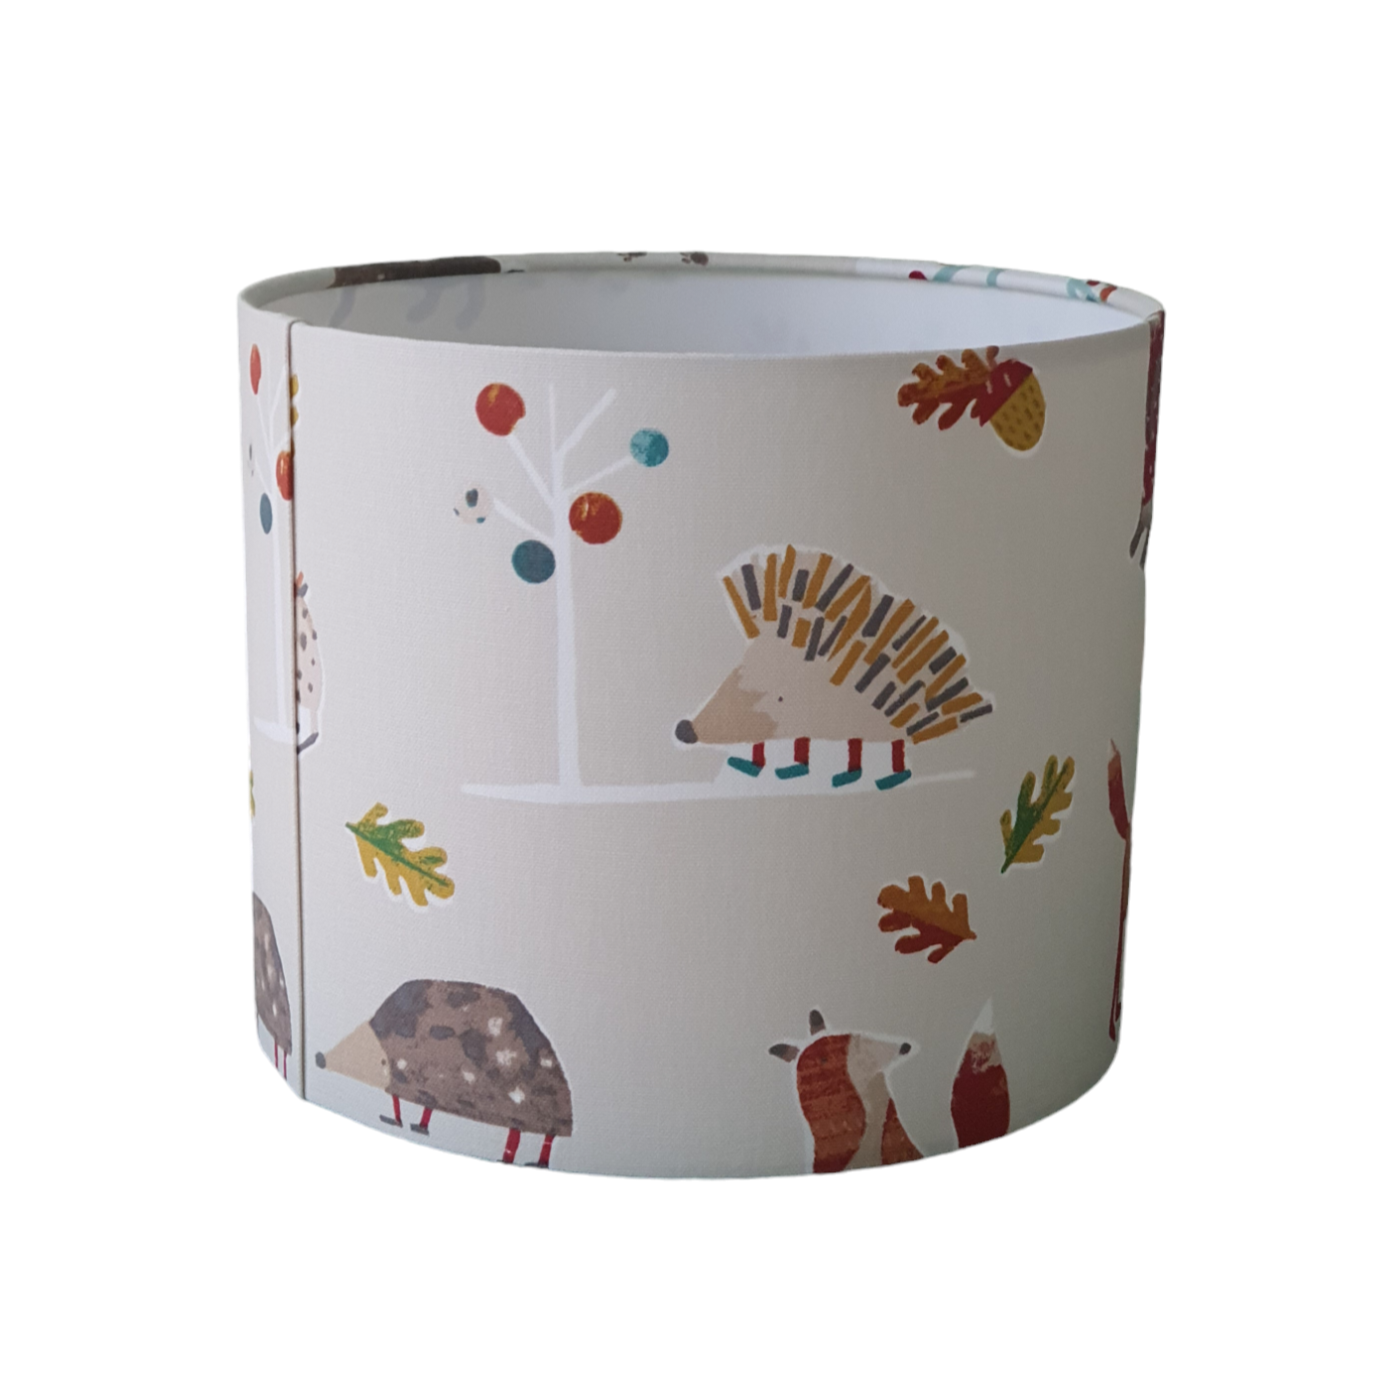 Handmade 25cm Drum Lampshade - Woodland and Forest Animals